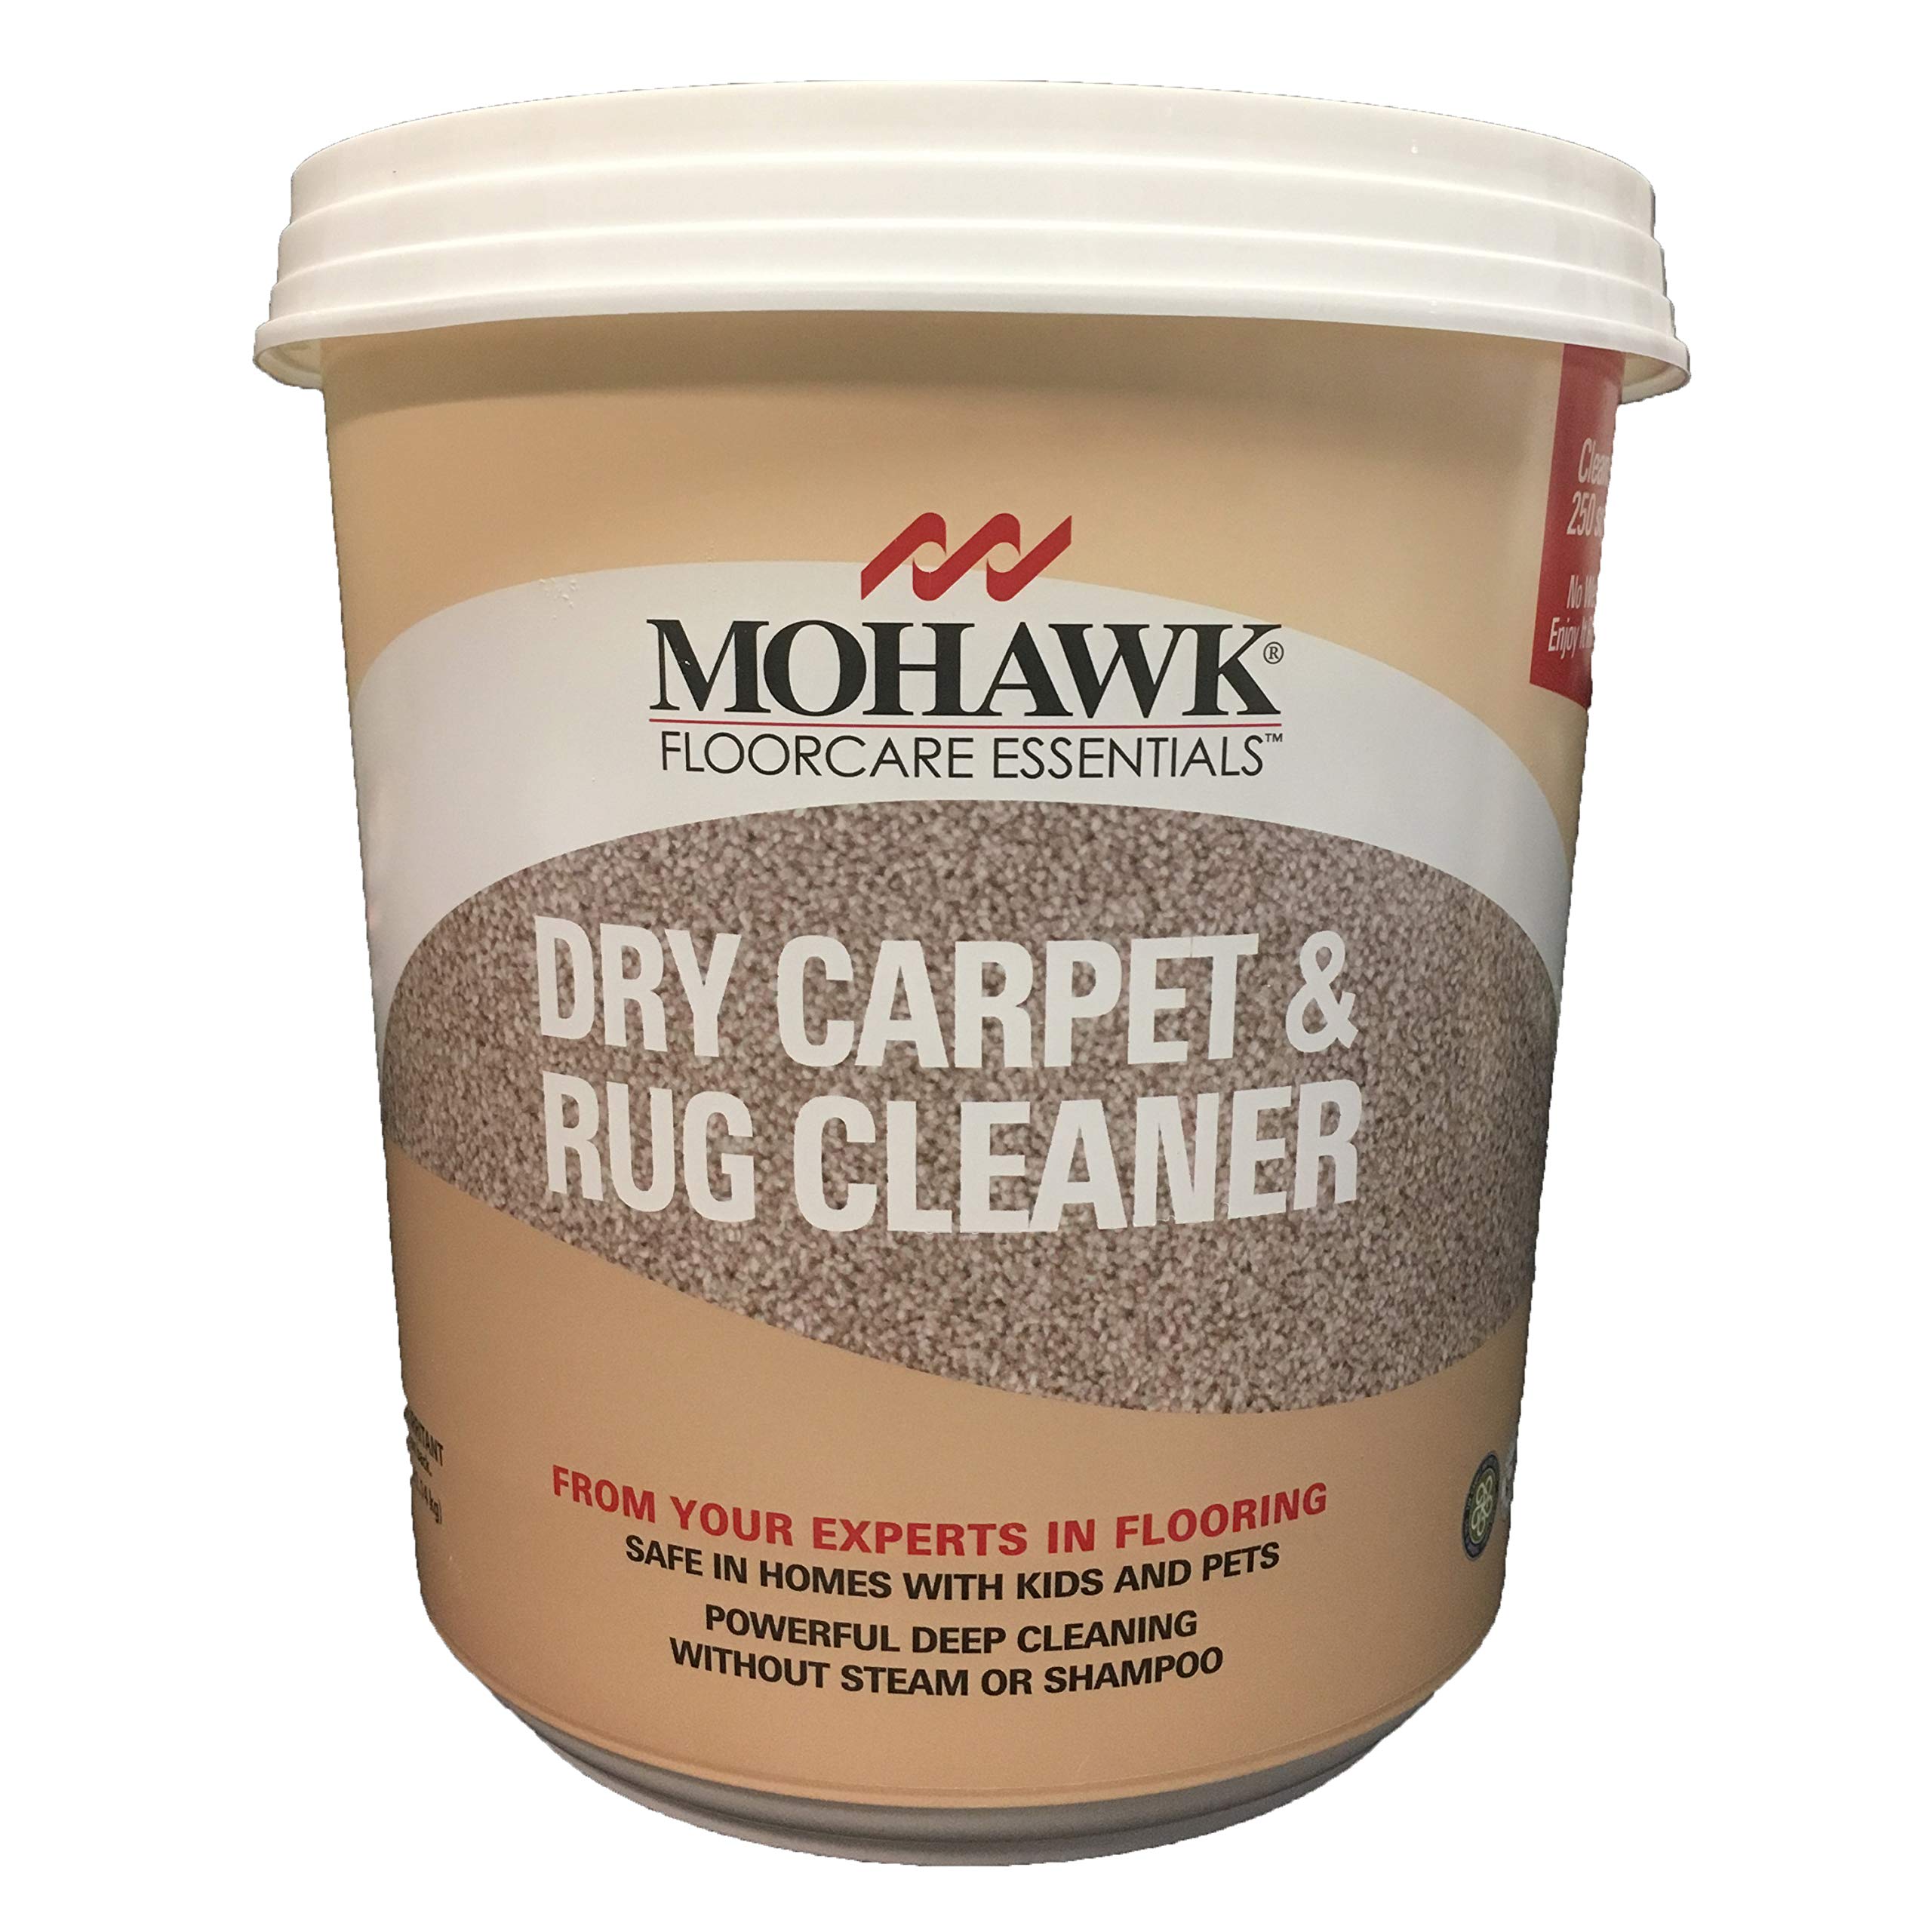 Mohawk Dry Carpet and Rug Cleaner - 2.5lb